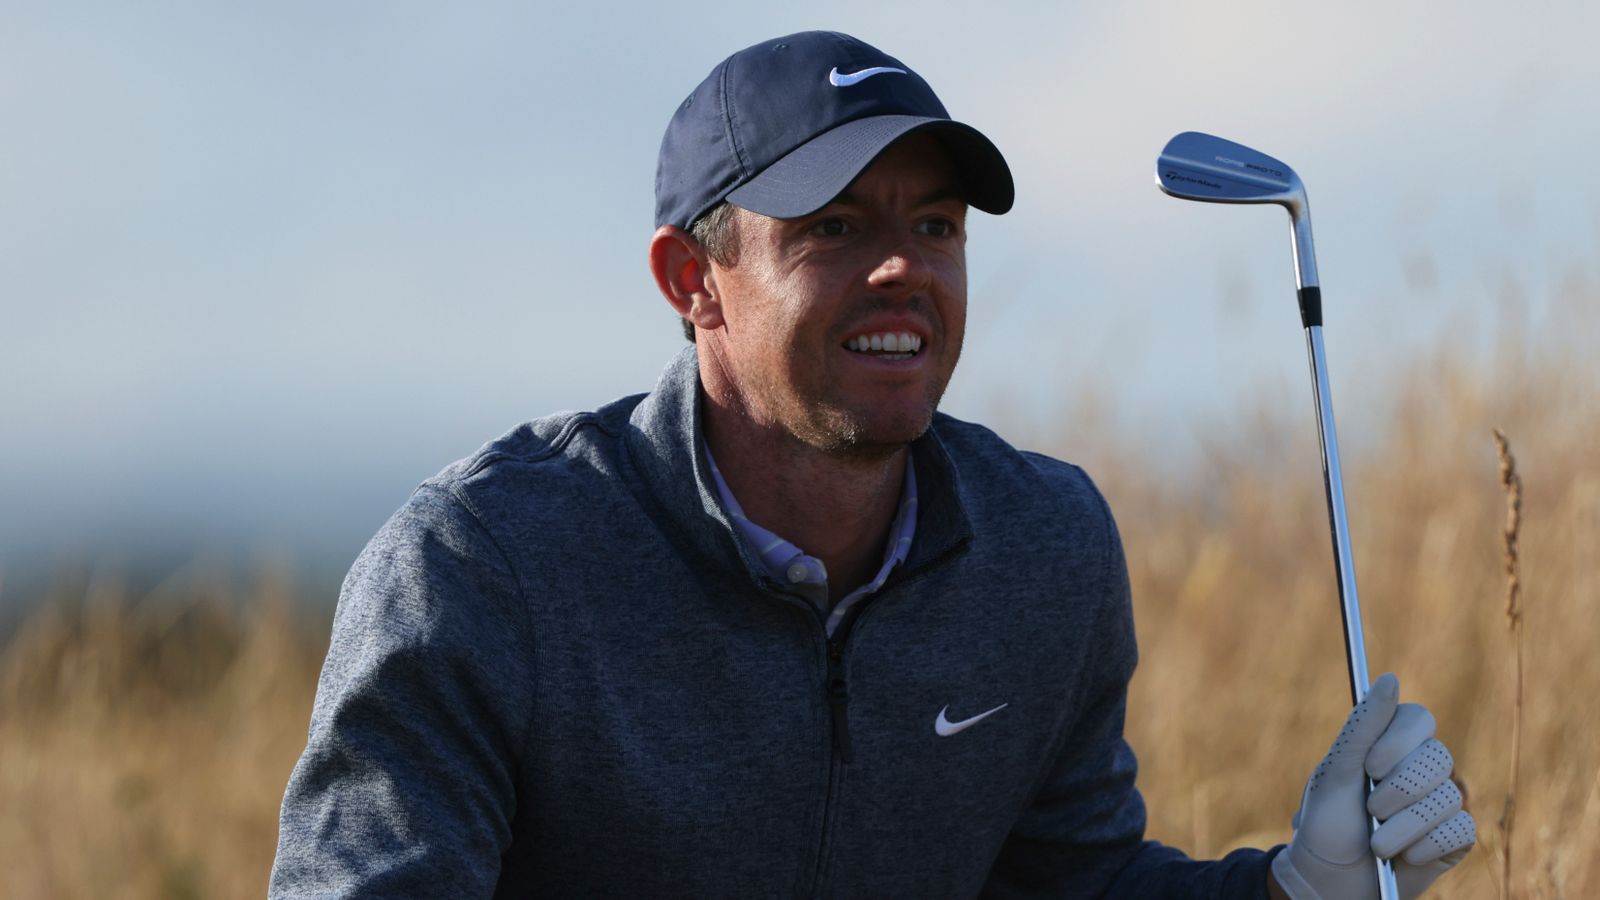 The 150th Open: Rory McIlroy targets end to major drought as Cameron Smith aims for St Andrews win